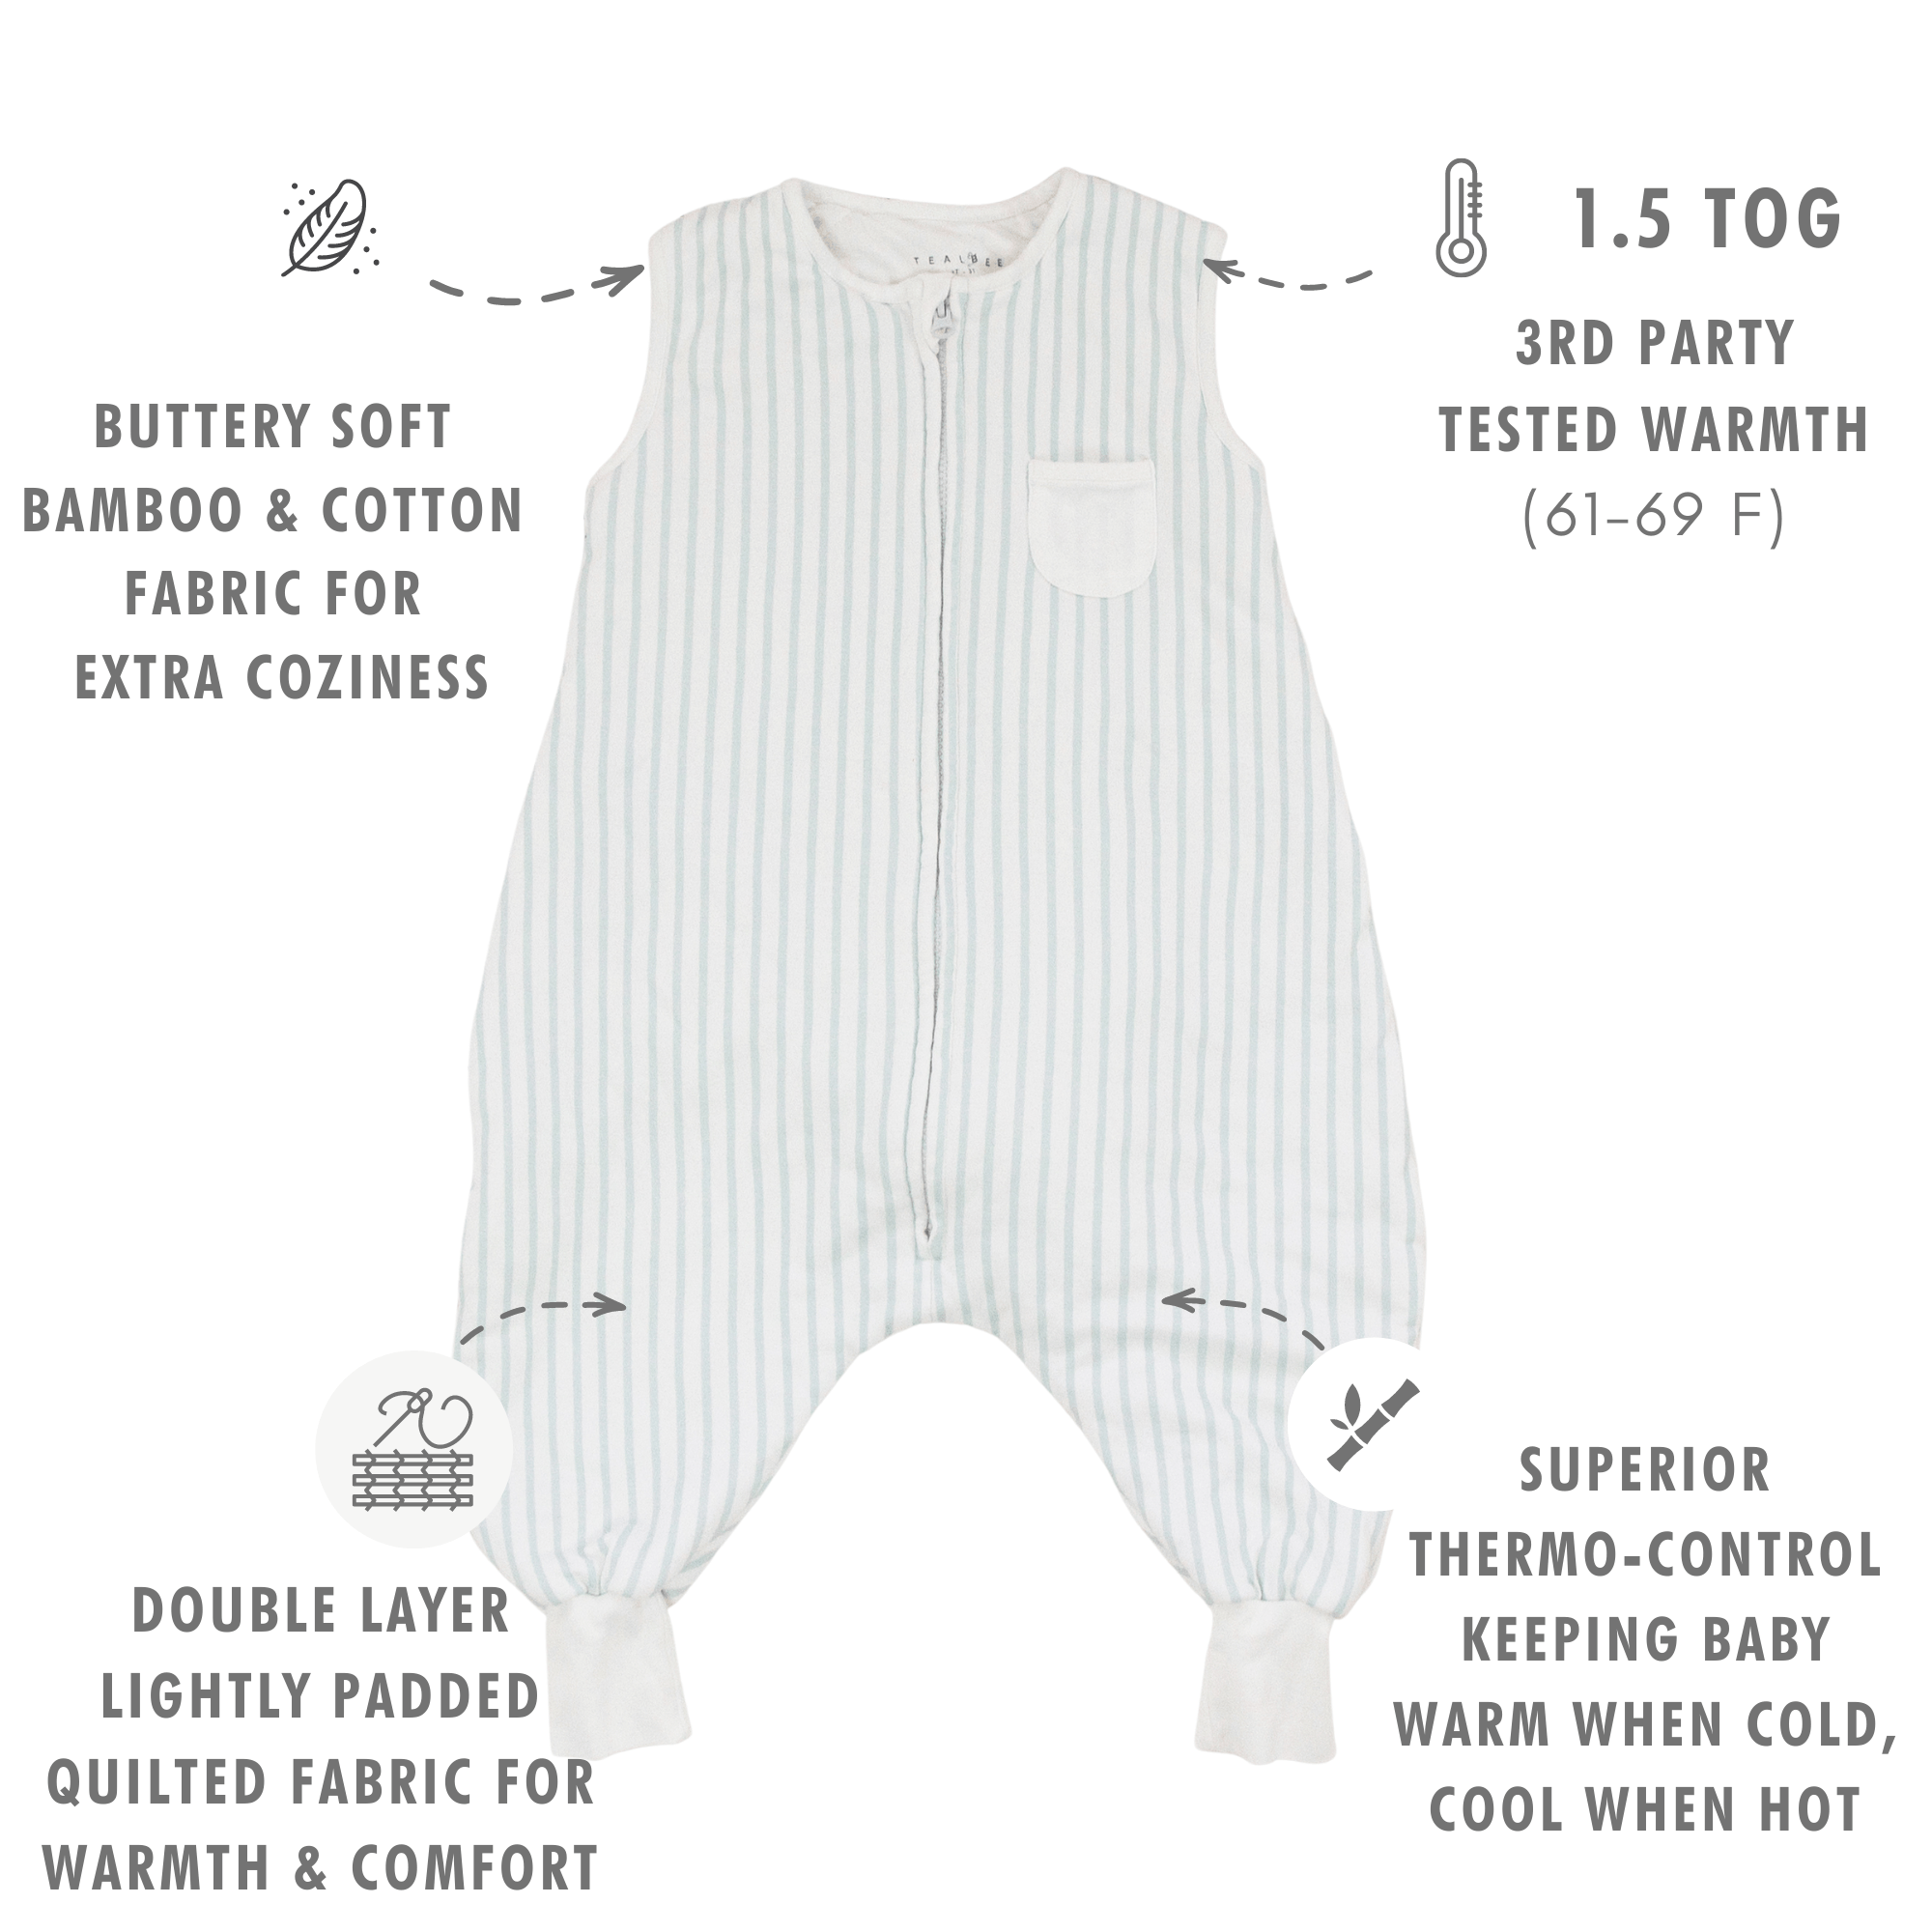 Dreamsuit Sleepsack with Legs - Buttery soft bamboo & cotton fabric for extra coziness, 1.5 TOG 3rd party tested warmth (61-69 F), Double layer lightly padded quilted fabric for warmth and comfort, superior thermo-control keeping baby warm when cold and cool when hot.